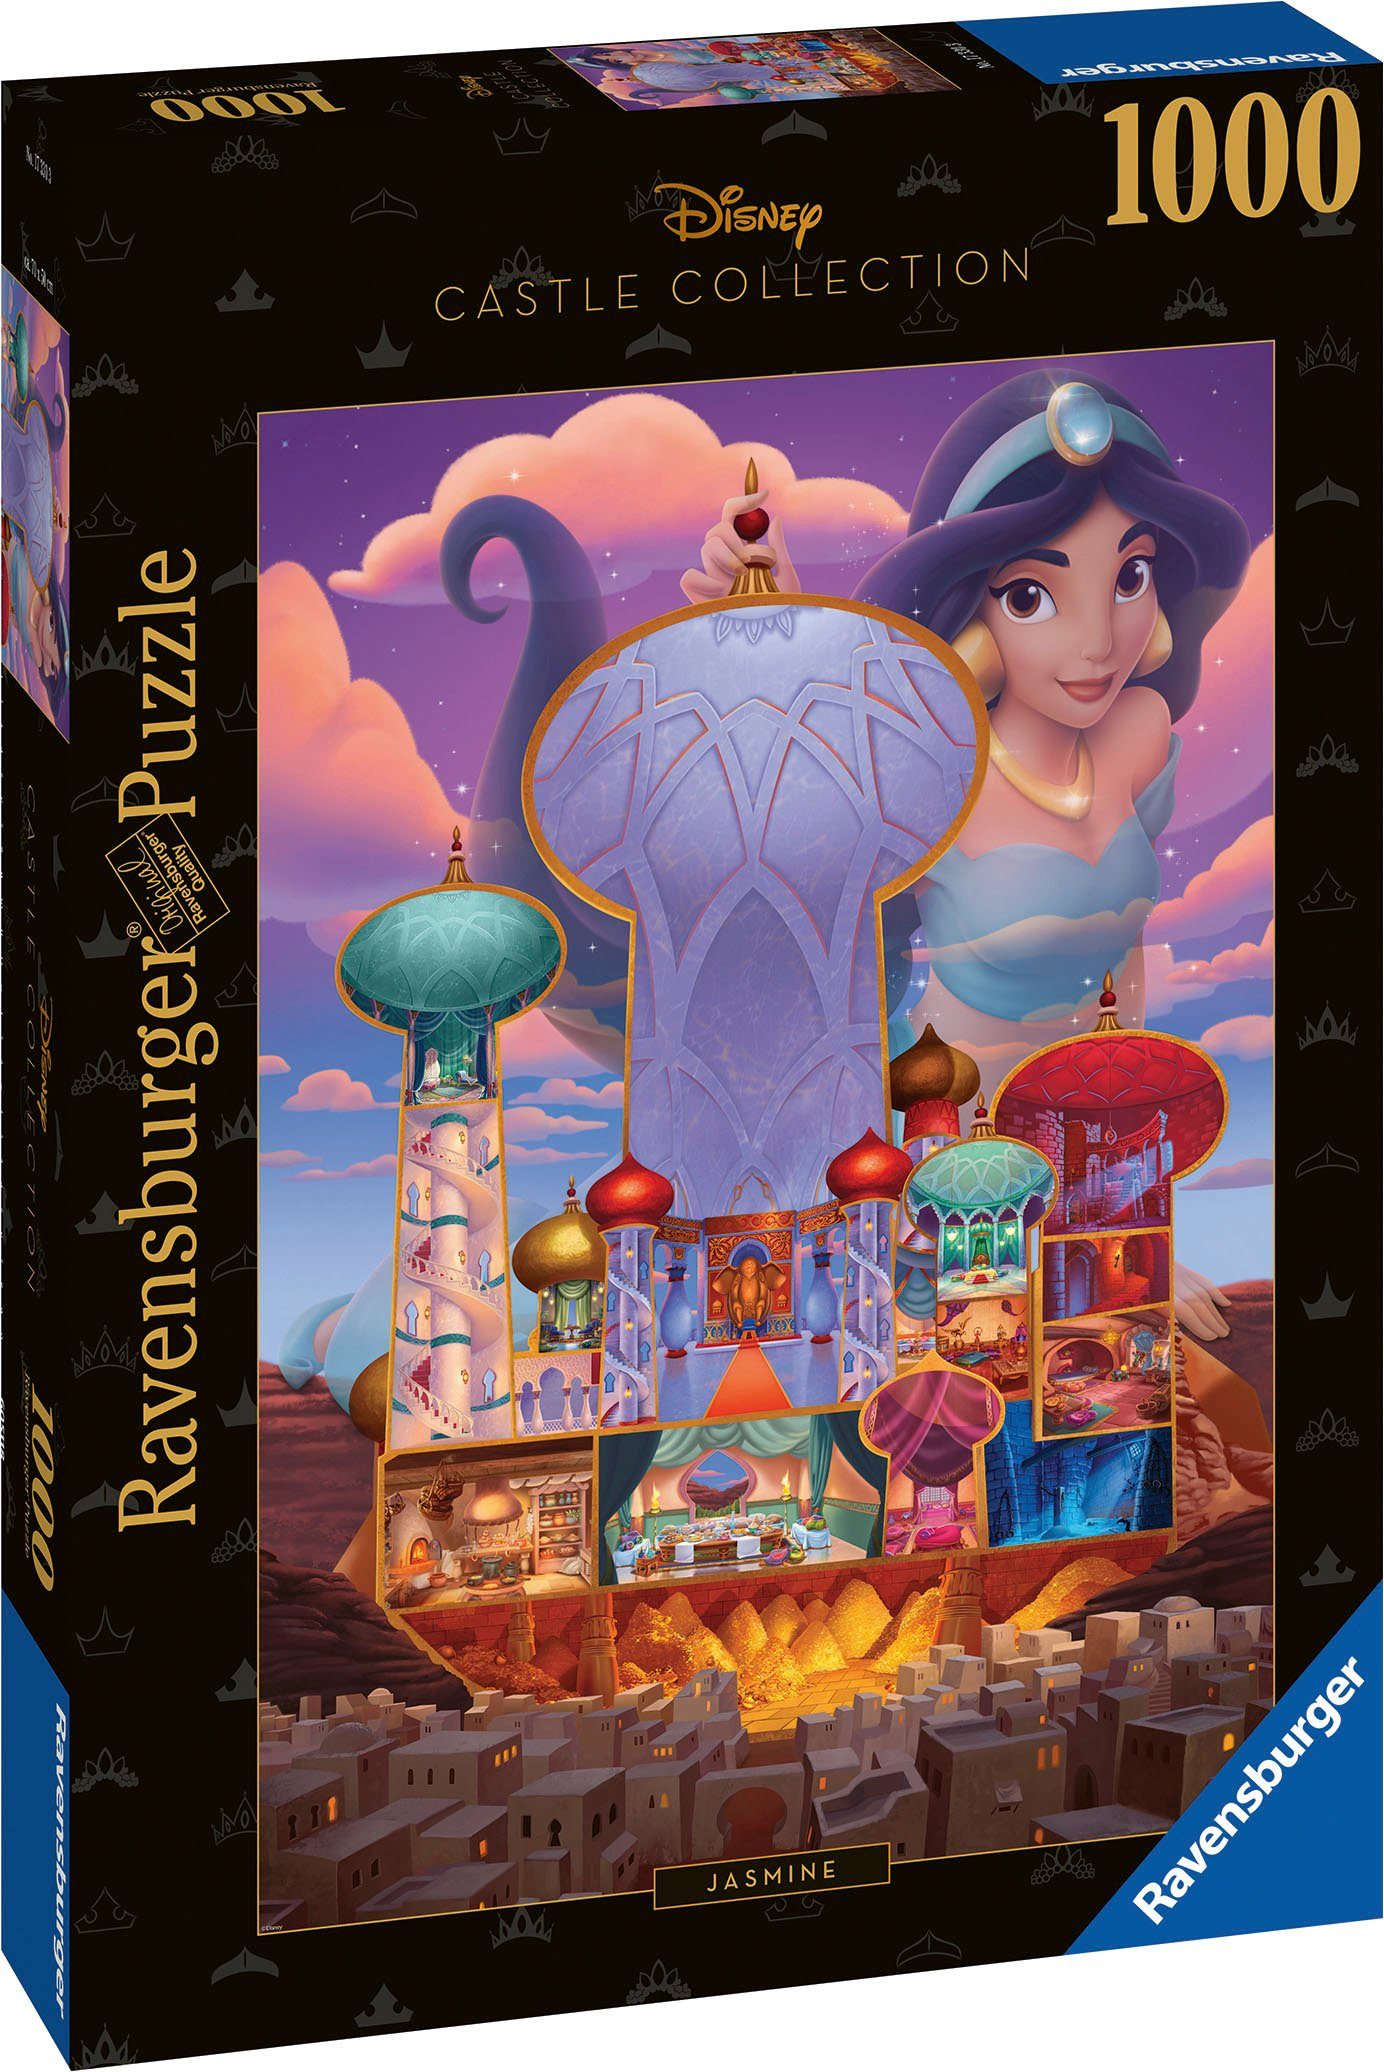 Made Ravensburger Germany Jasmin, Disney 1000 Castle in Puzzle Puzzleteile, Collection,